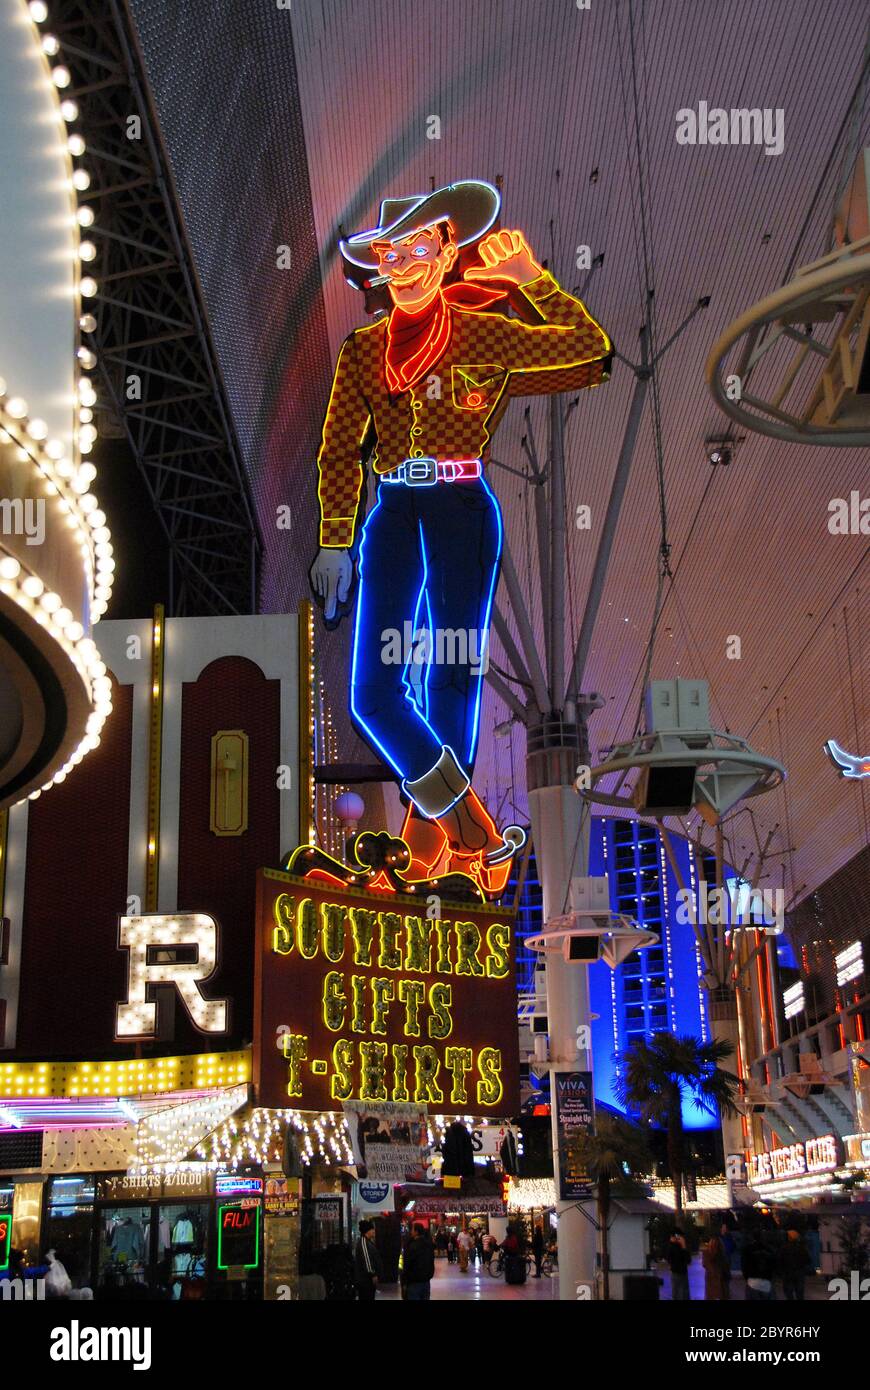 Fremont-CowBoy North Las Vegas 217 Hotel and most important places in Las  Vegas The most beautiful place in Las Vegas Stock Photo - Alamy